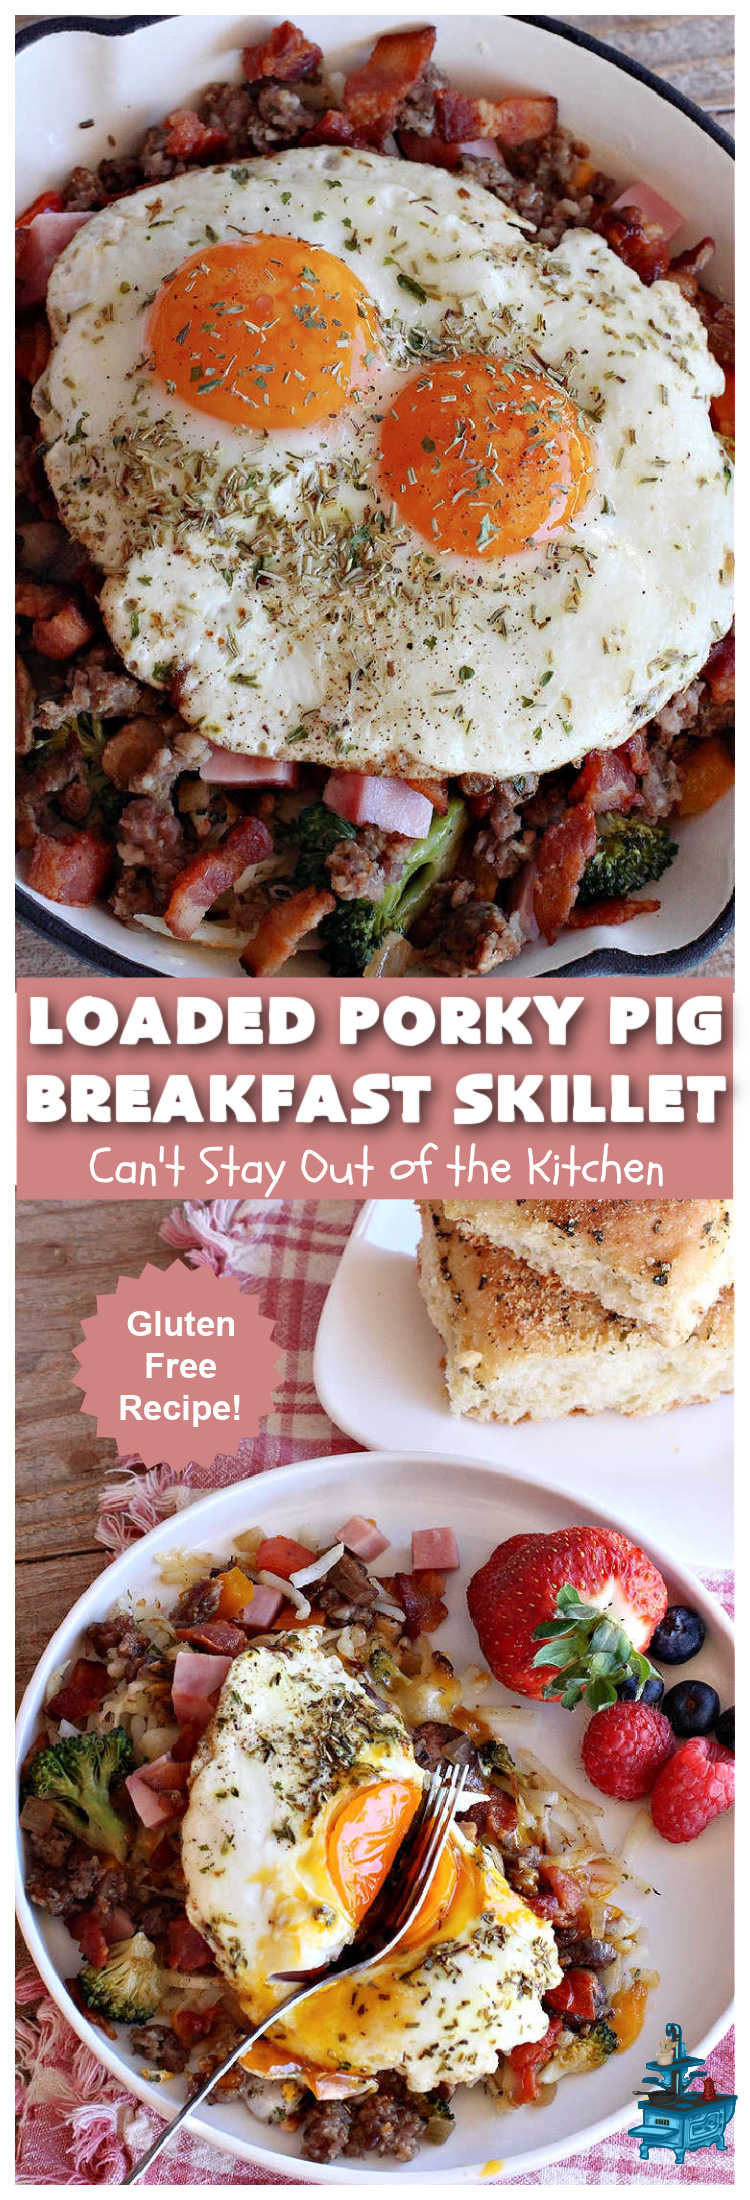 Loaded Porky Pig Breakfast Skillet | Can't Stay Out of the Kitchen